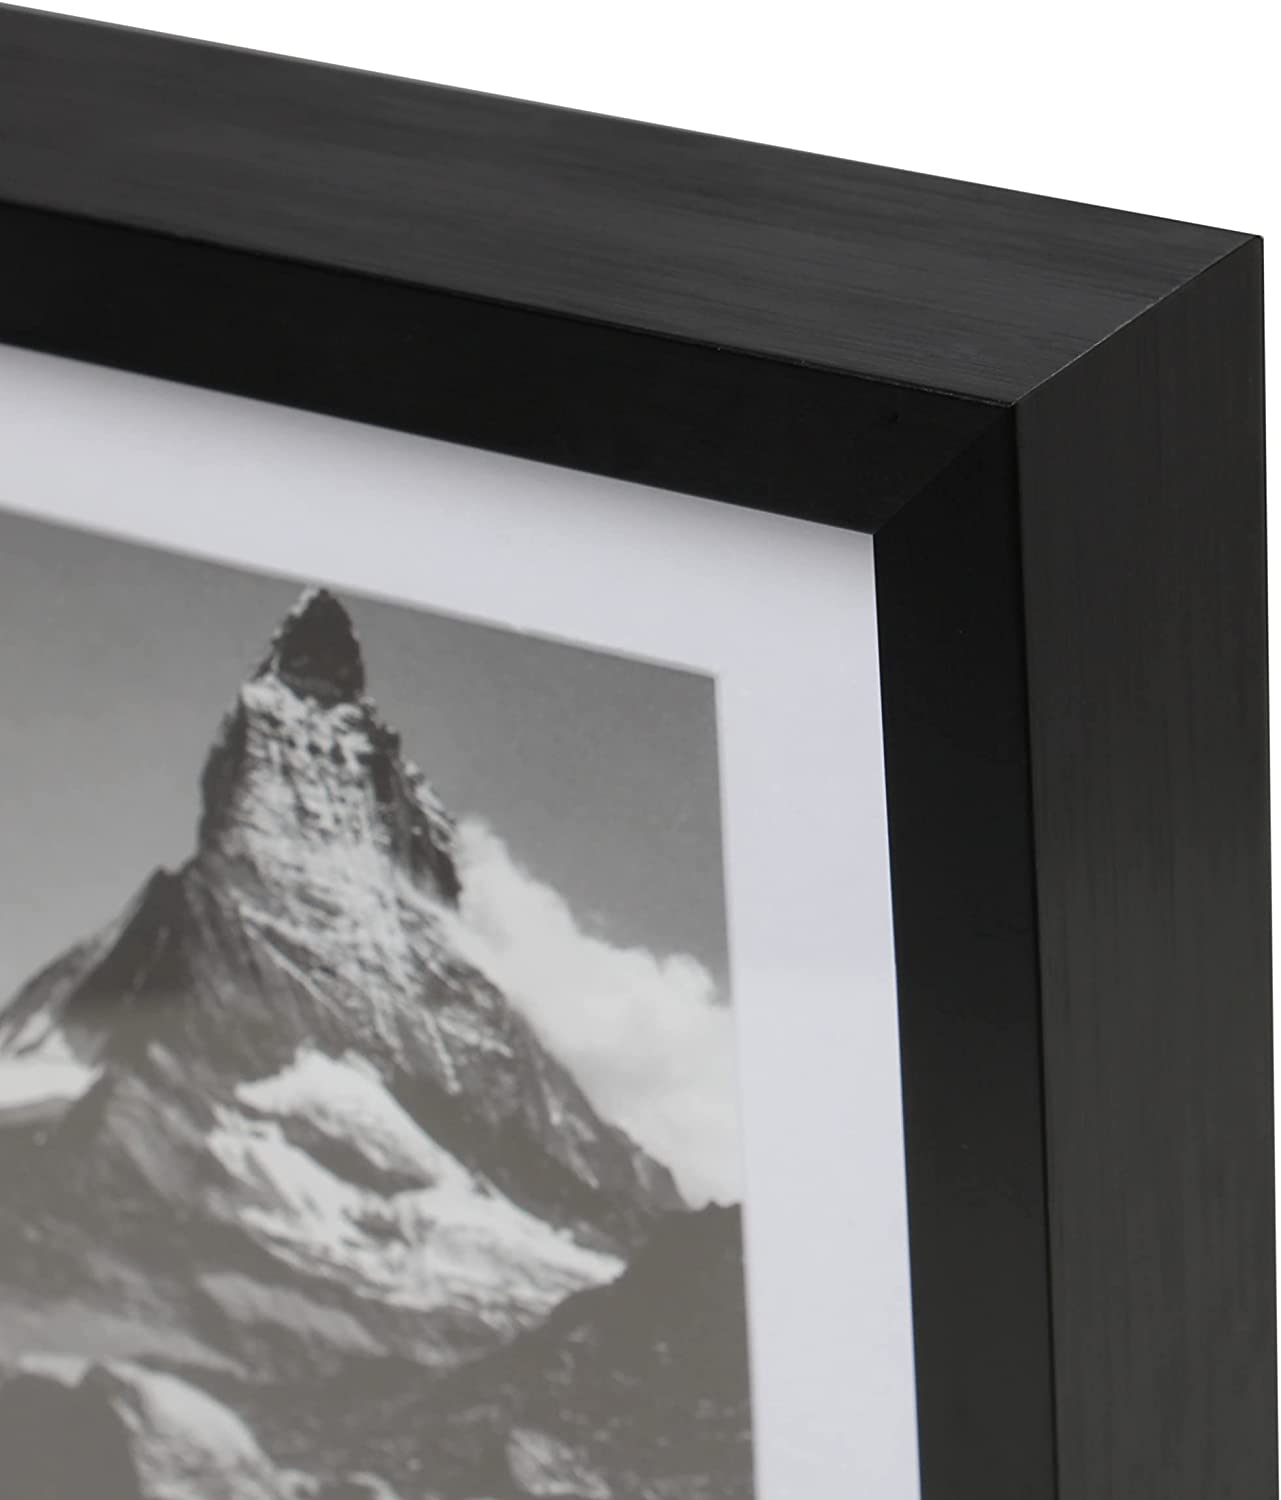 5" x 7" Deluxe Black Aluminum Contemporary Picture Frame, 4" x 6" Matted